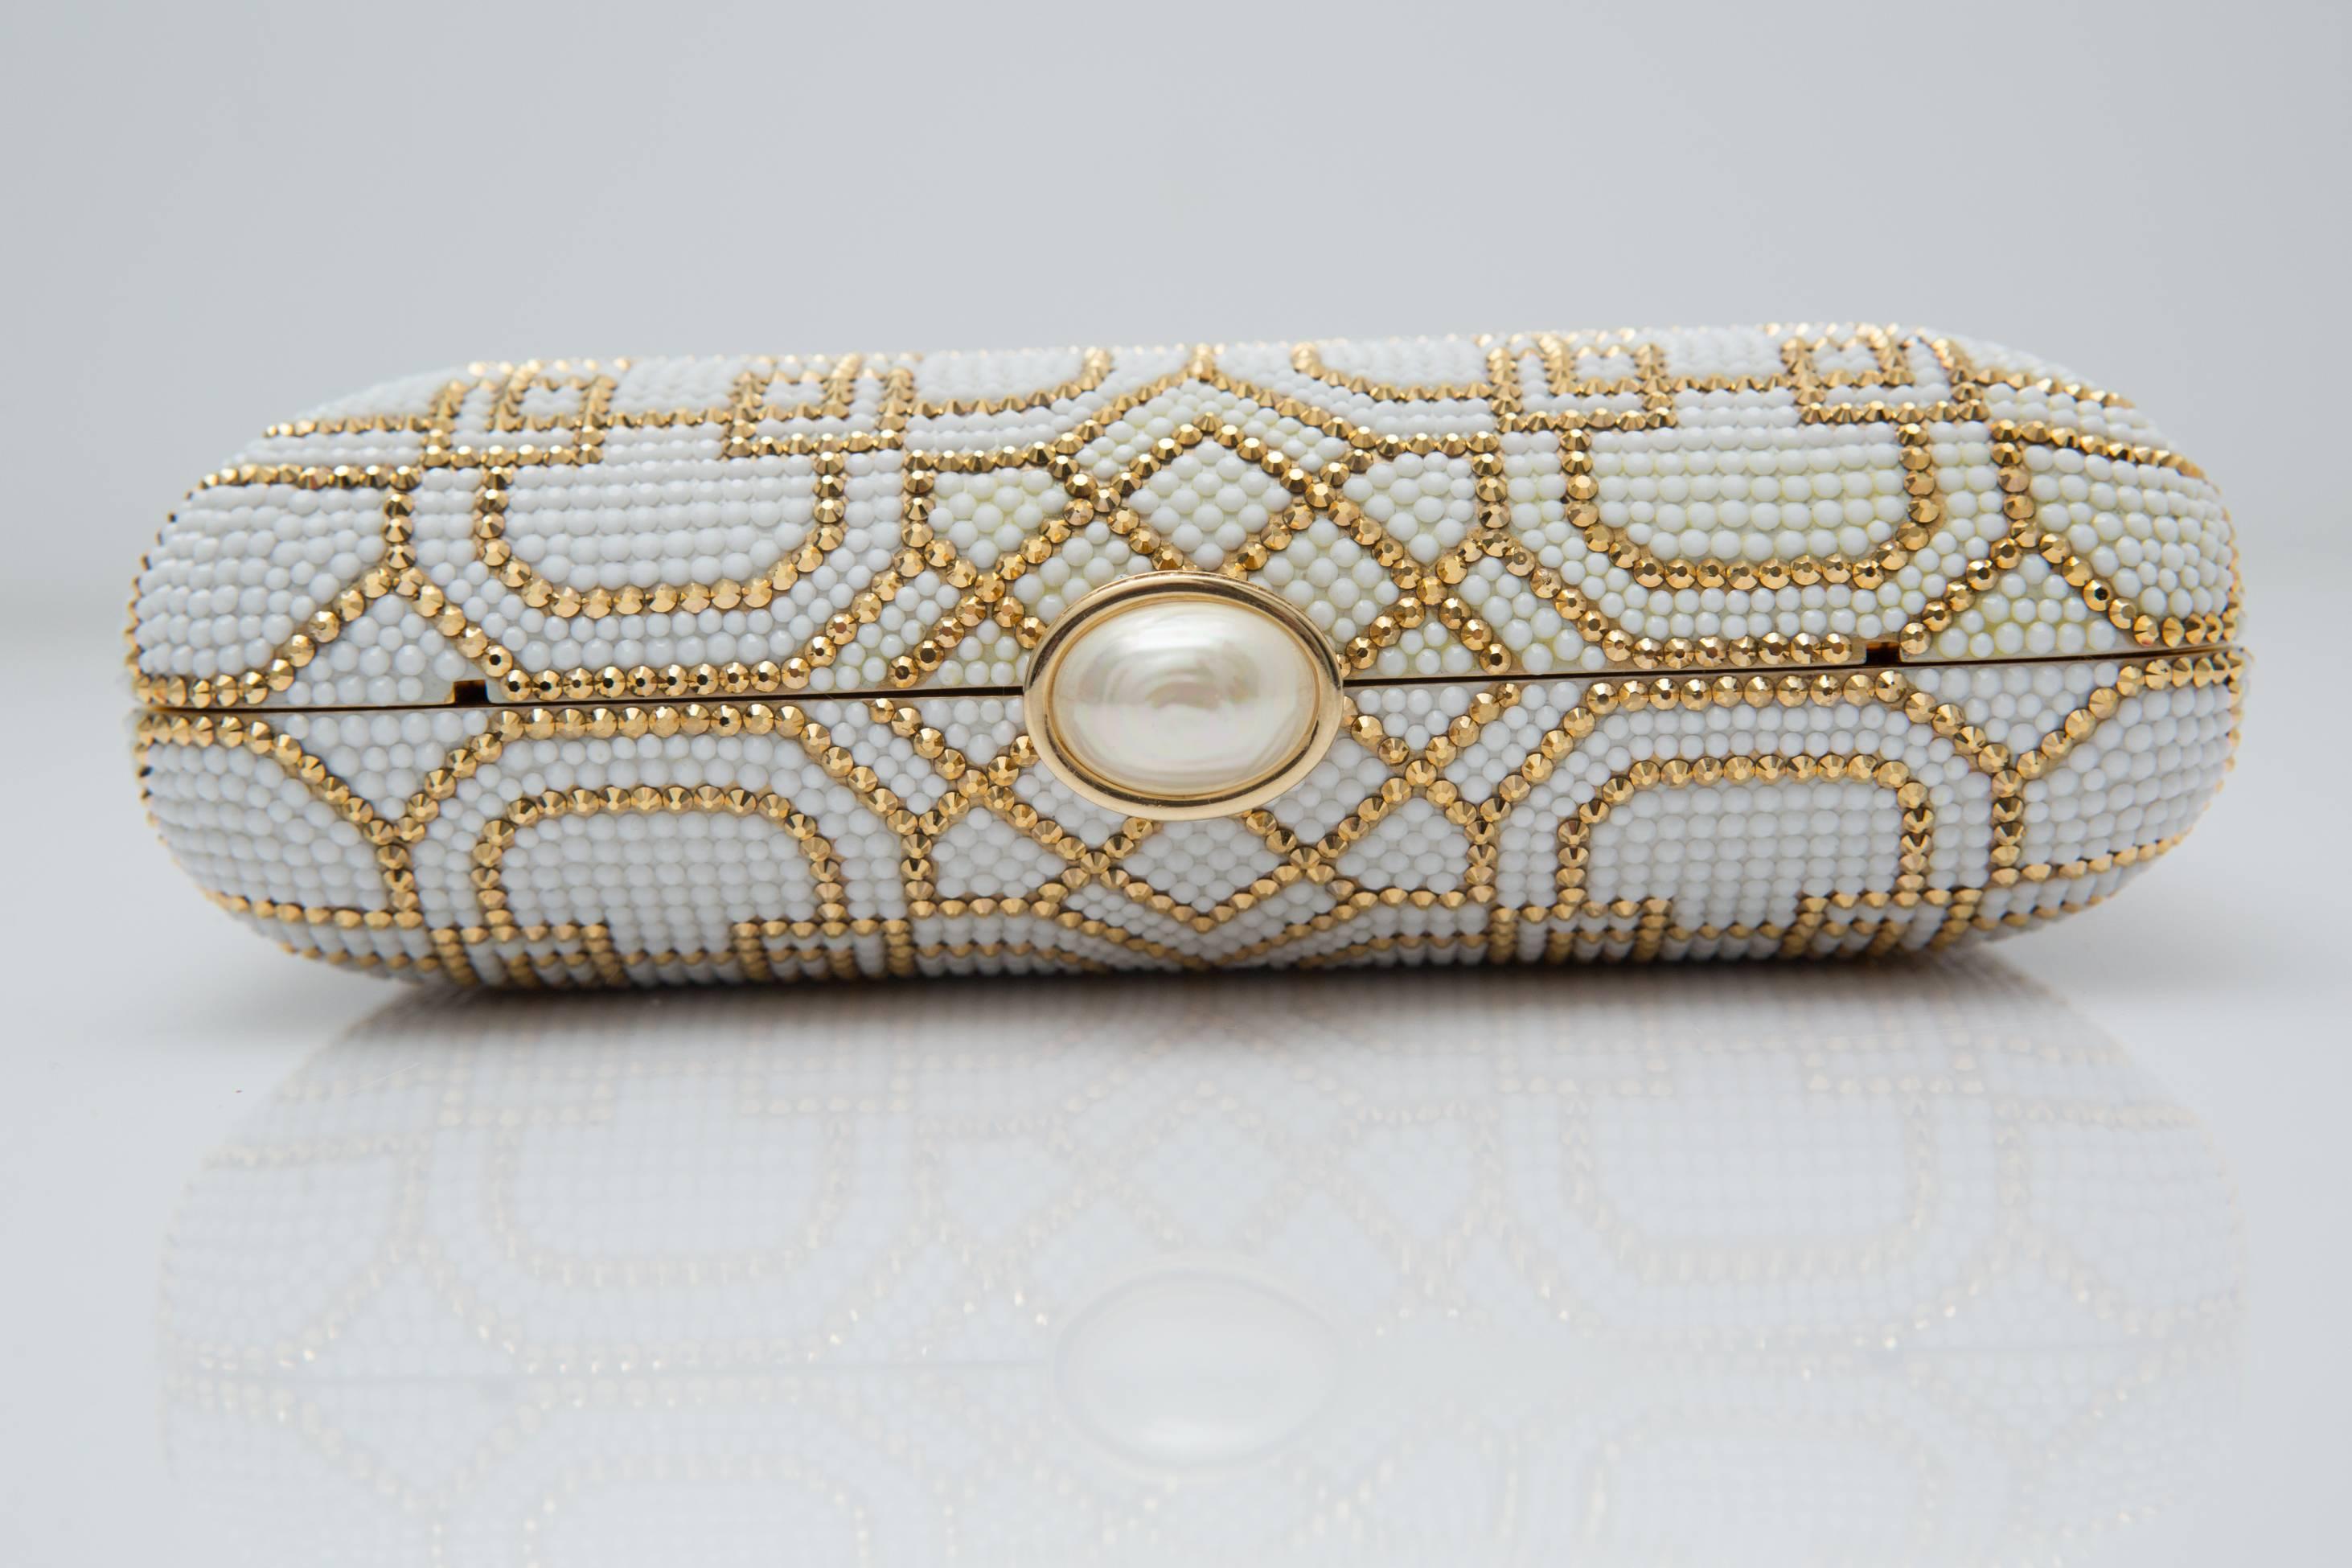 Women's Judith Leiber Ivory and Gold Patterned Clutch 